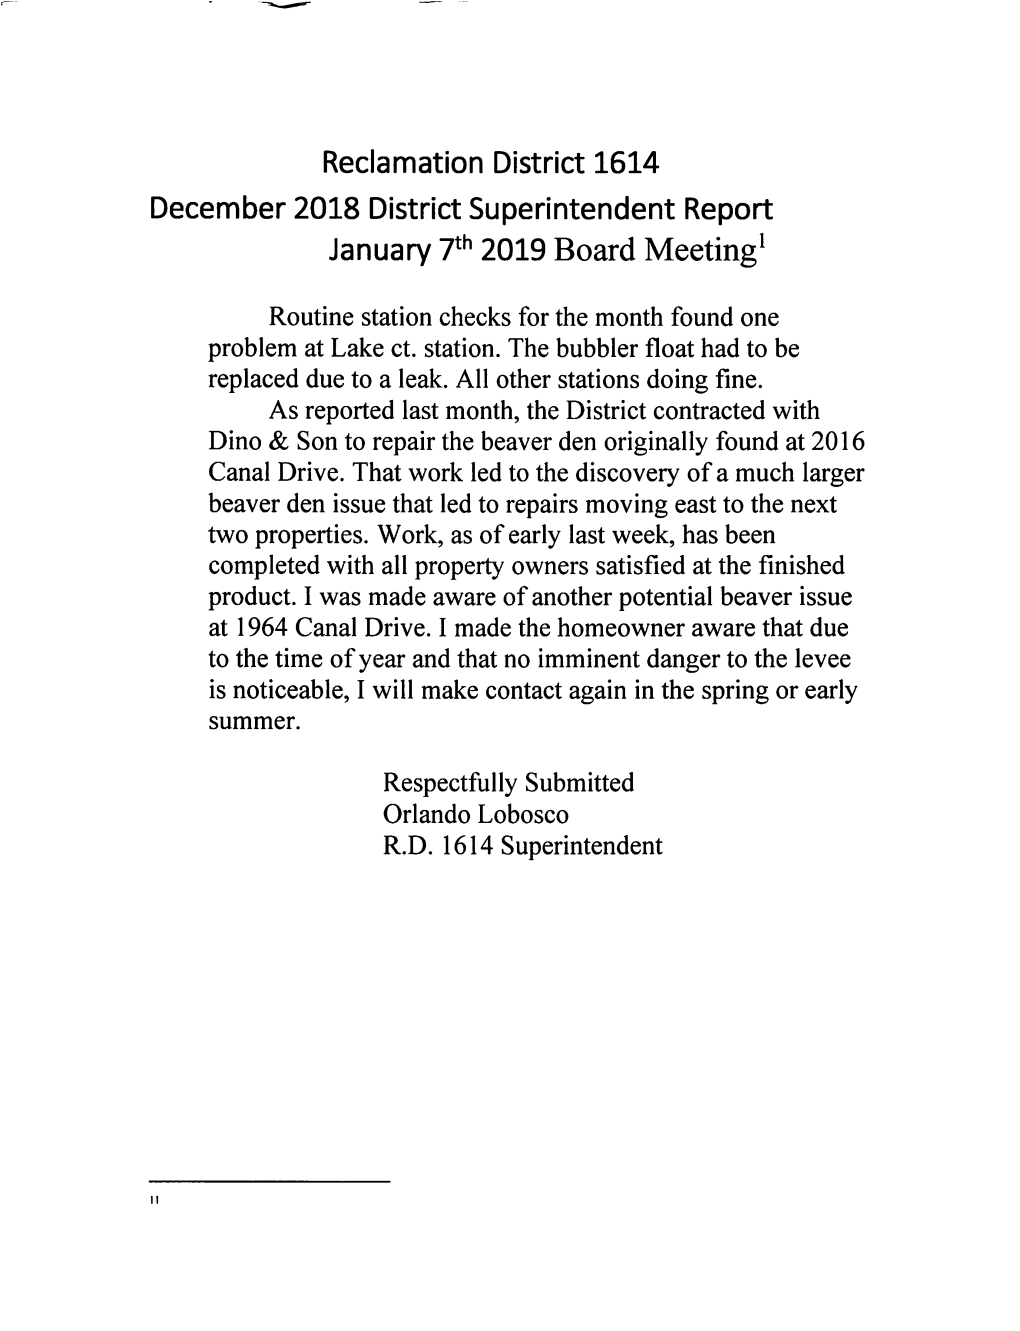 Reclamation District 1614 December 2018 District Superintendent Report January 7Th 2019 Board Meeting'